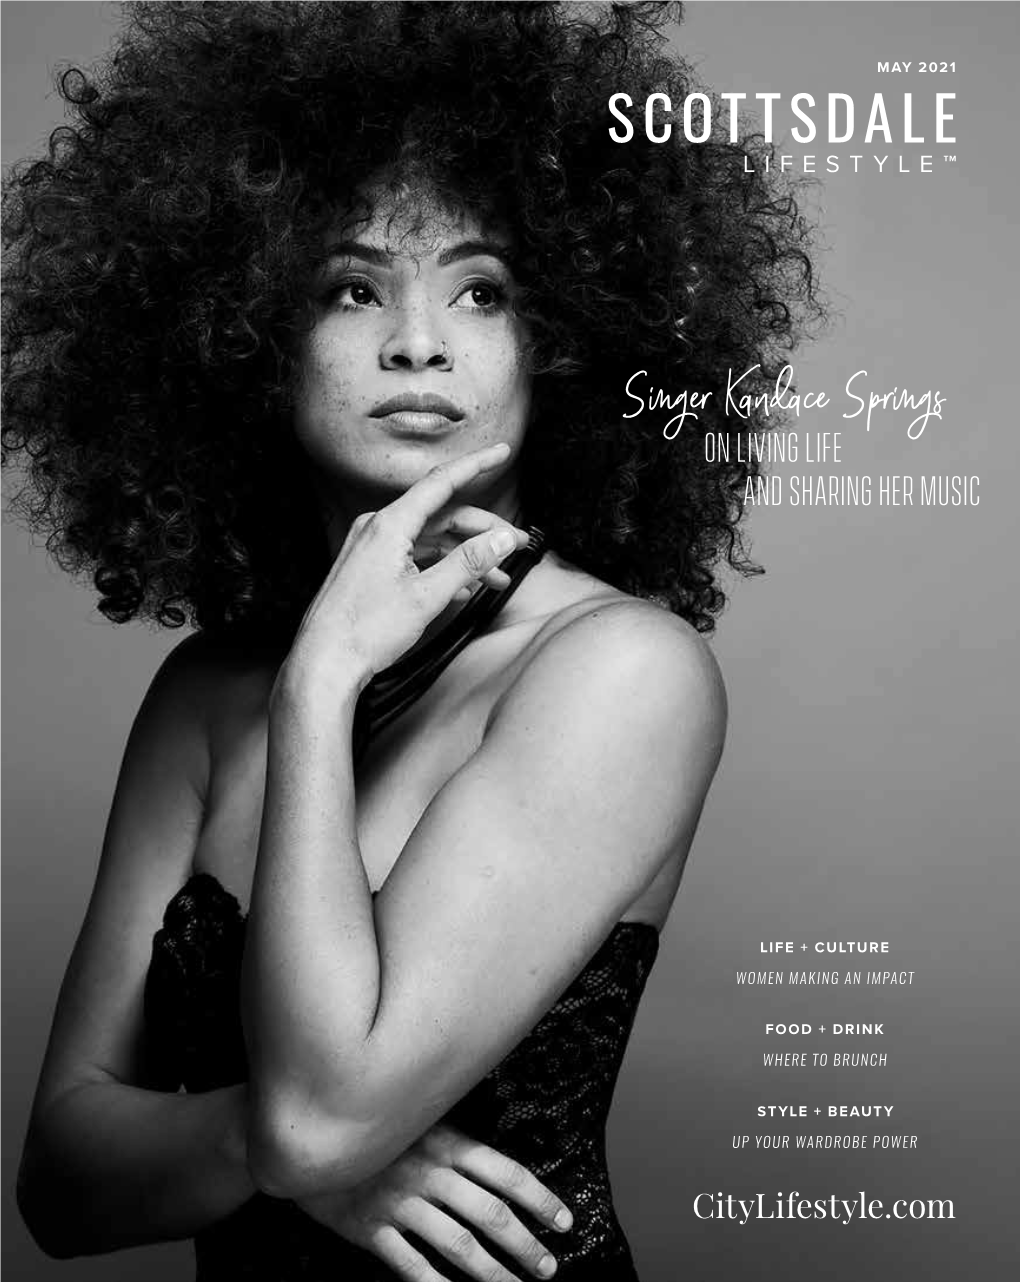 Singer Kandace Springs on Living Life and Sharing Her Music